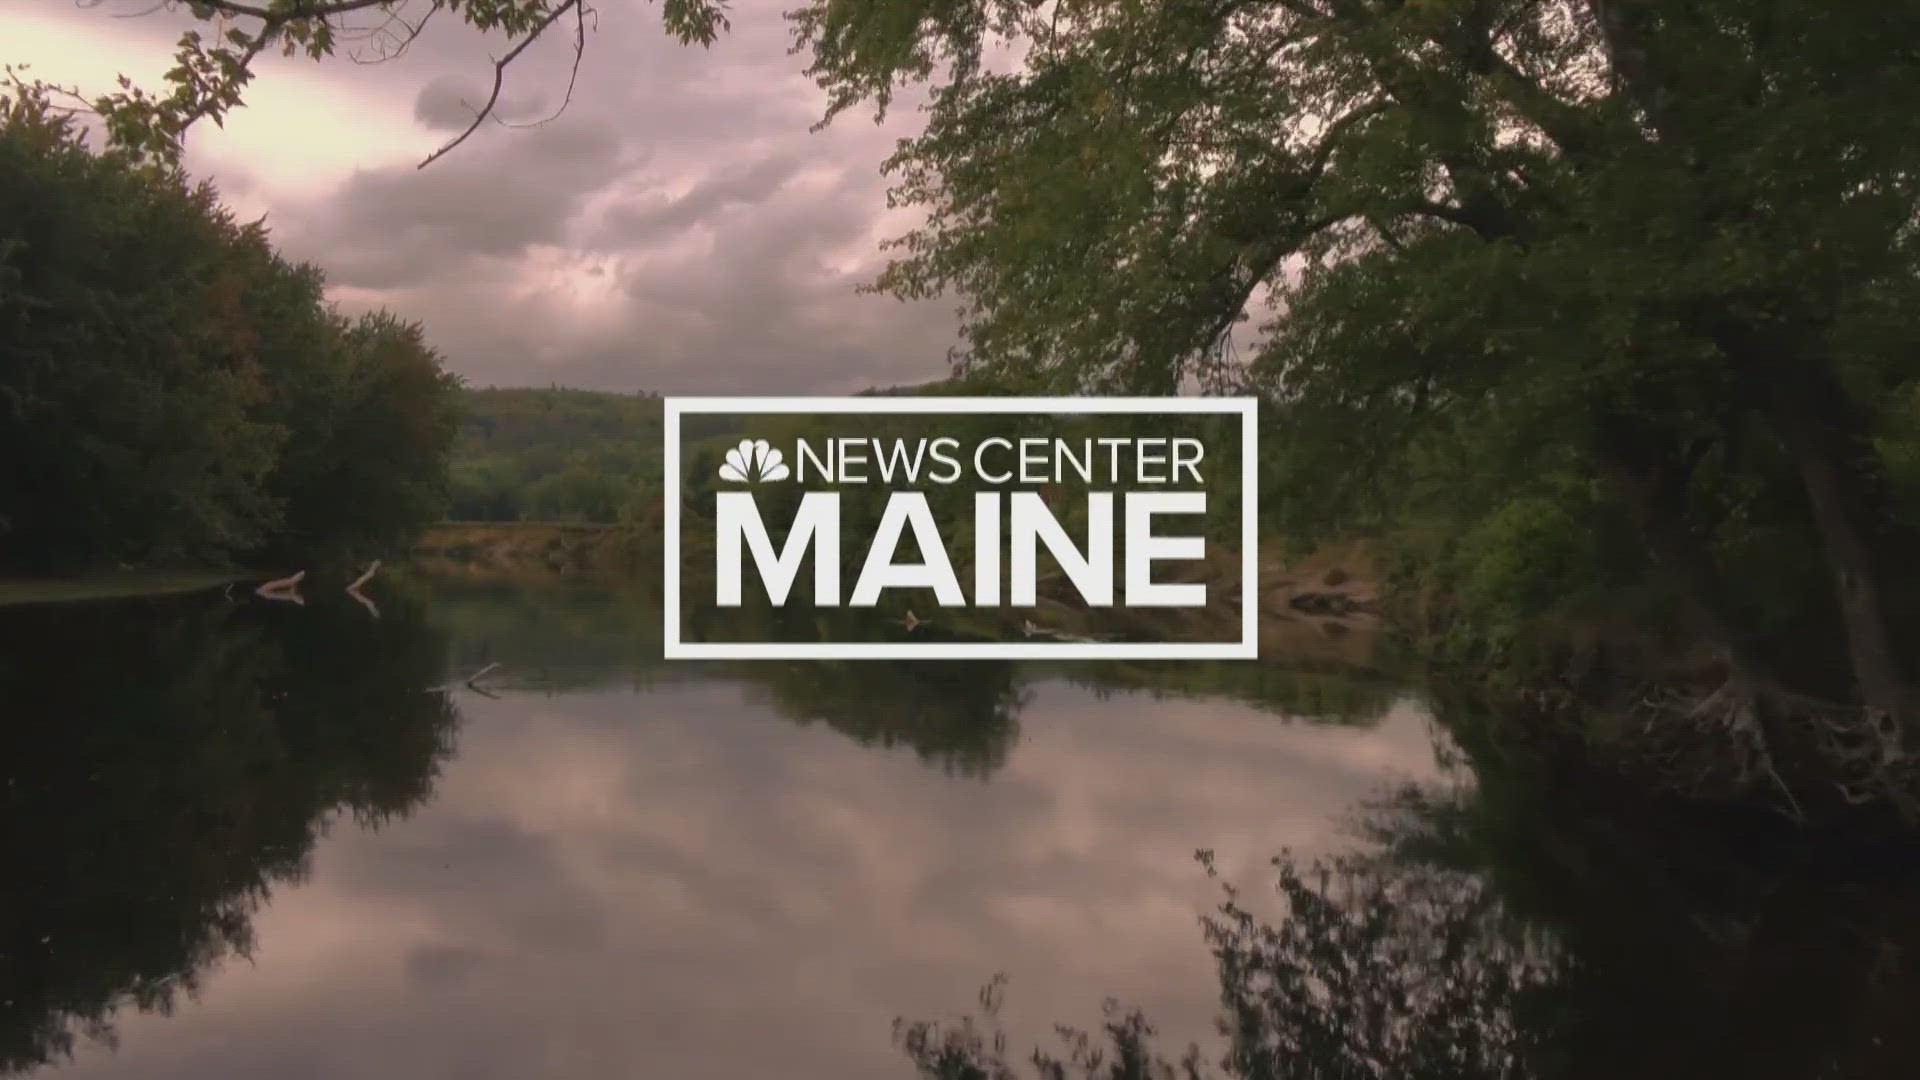 NEWS CENTER Maine presents local, regional, state and national news, along with the latest breaking news events, information, and weather forecast.